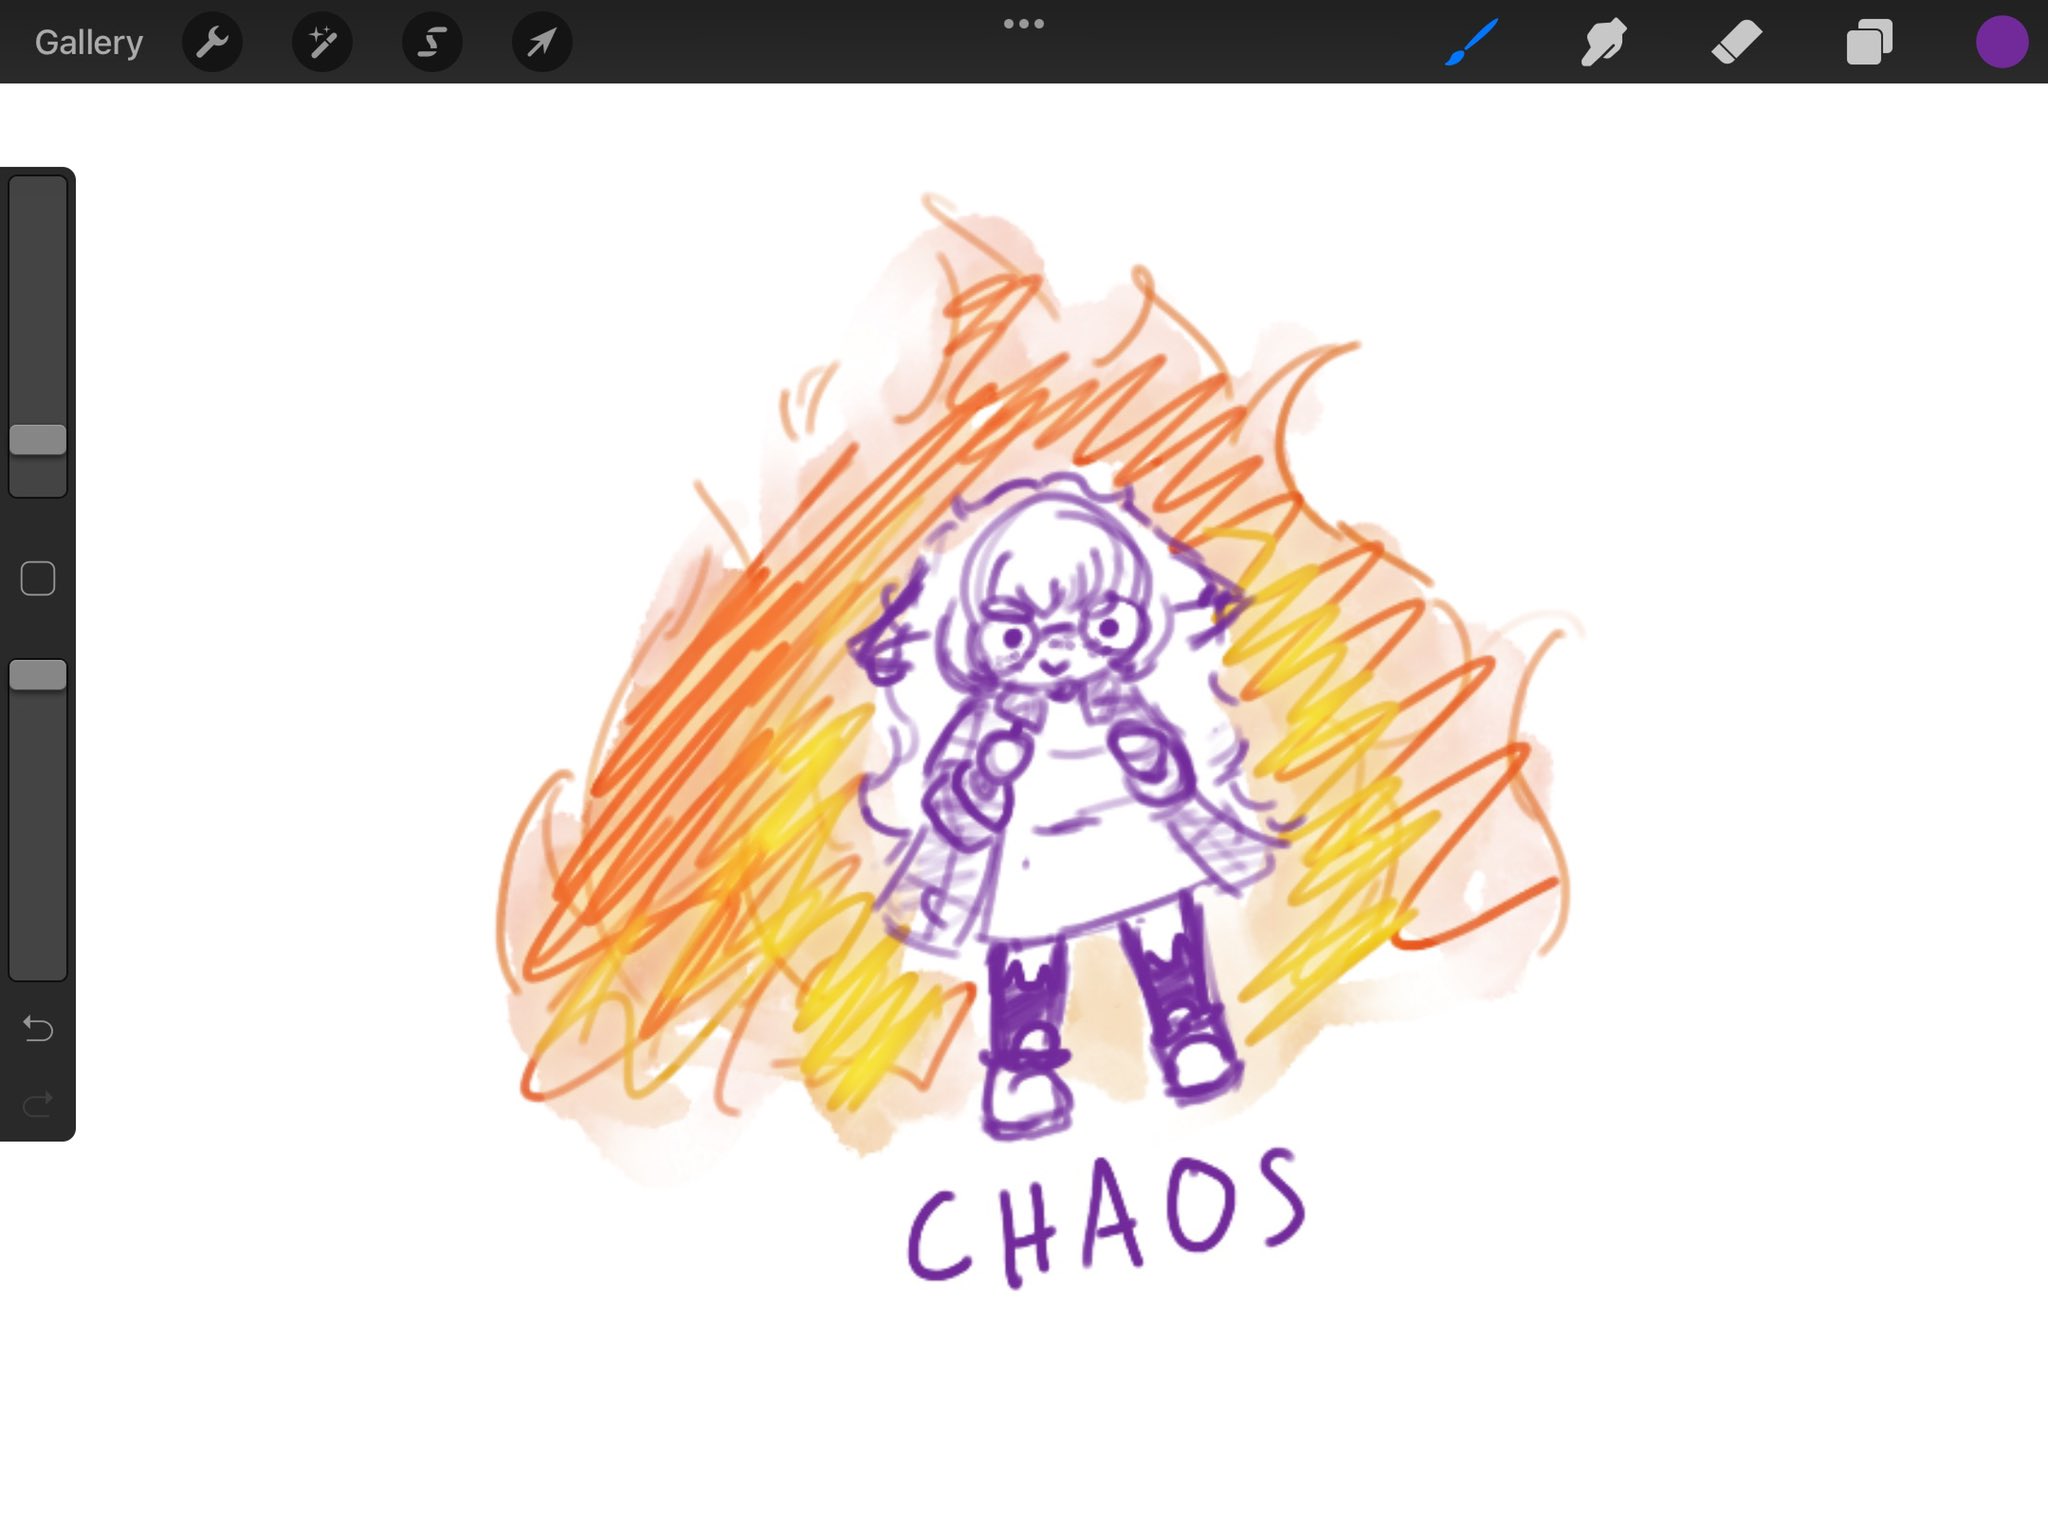 a quick doodle of the previously described catgirl, in fire, with the text "chaos" above her